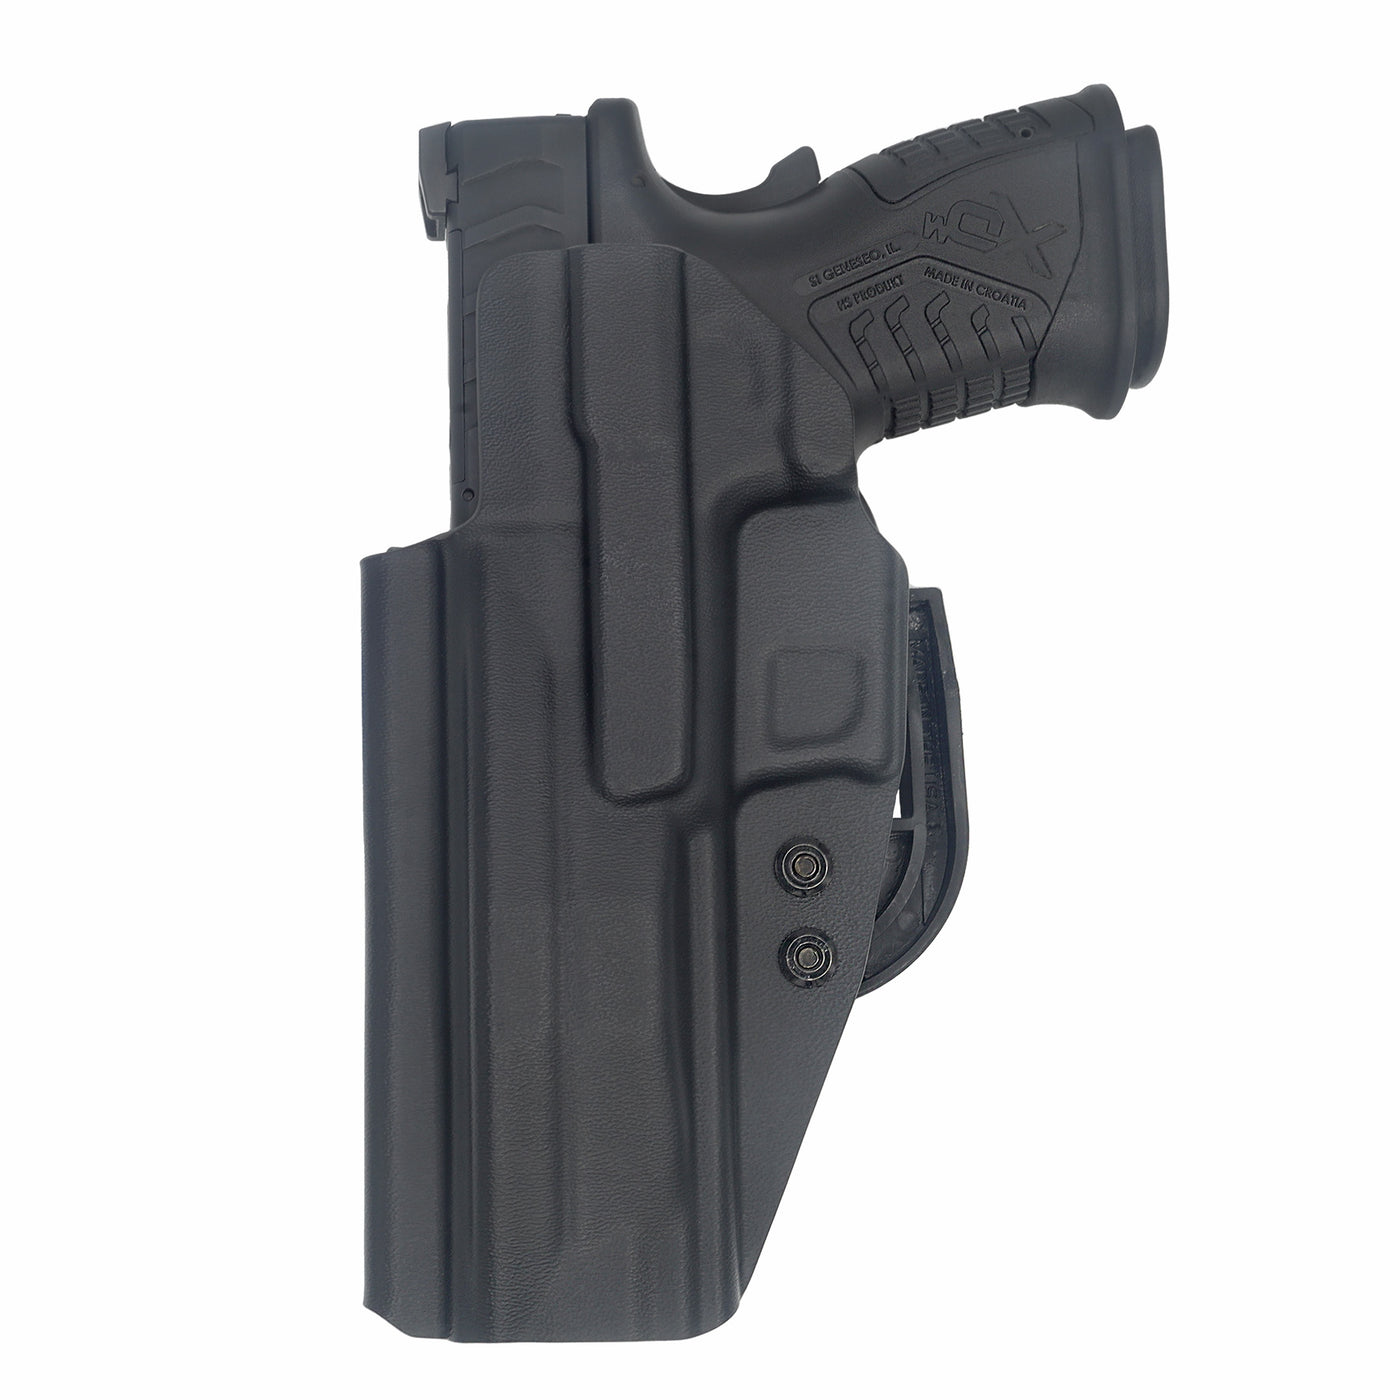 C&G Holsters Quickship IWB ALPHA UPGRADE Covert Springfield XDm 5.25" in holstered position back view